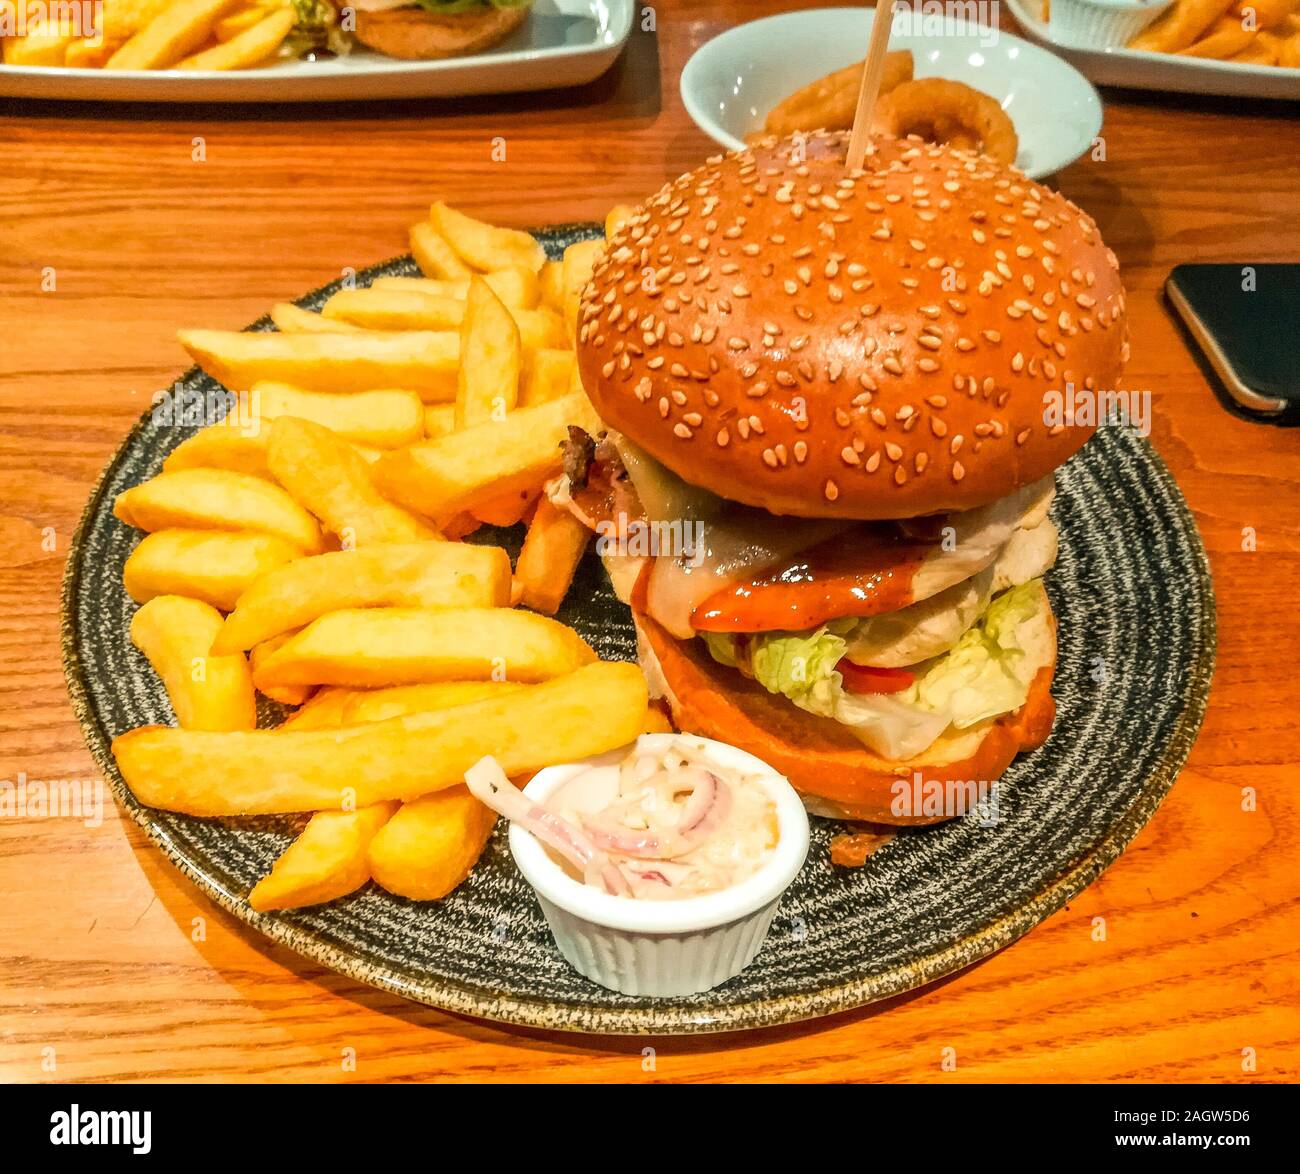 A typical British pub lunch meal. Burger, chips and coleslaw. Stock Photo